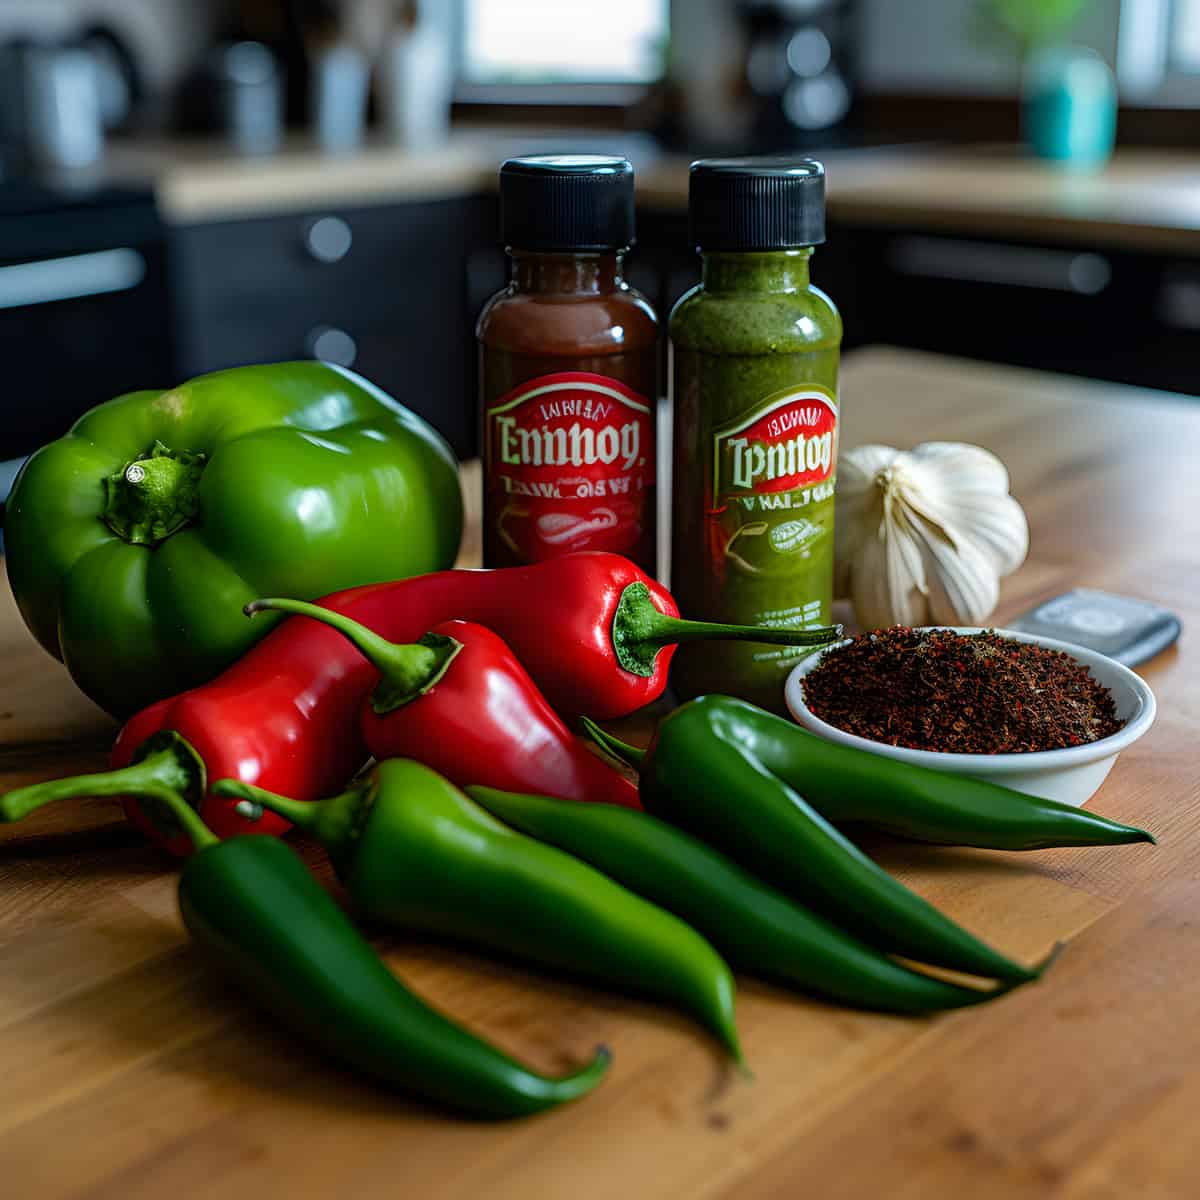 Jalapeno Condiments on a kitchen counter